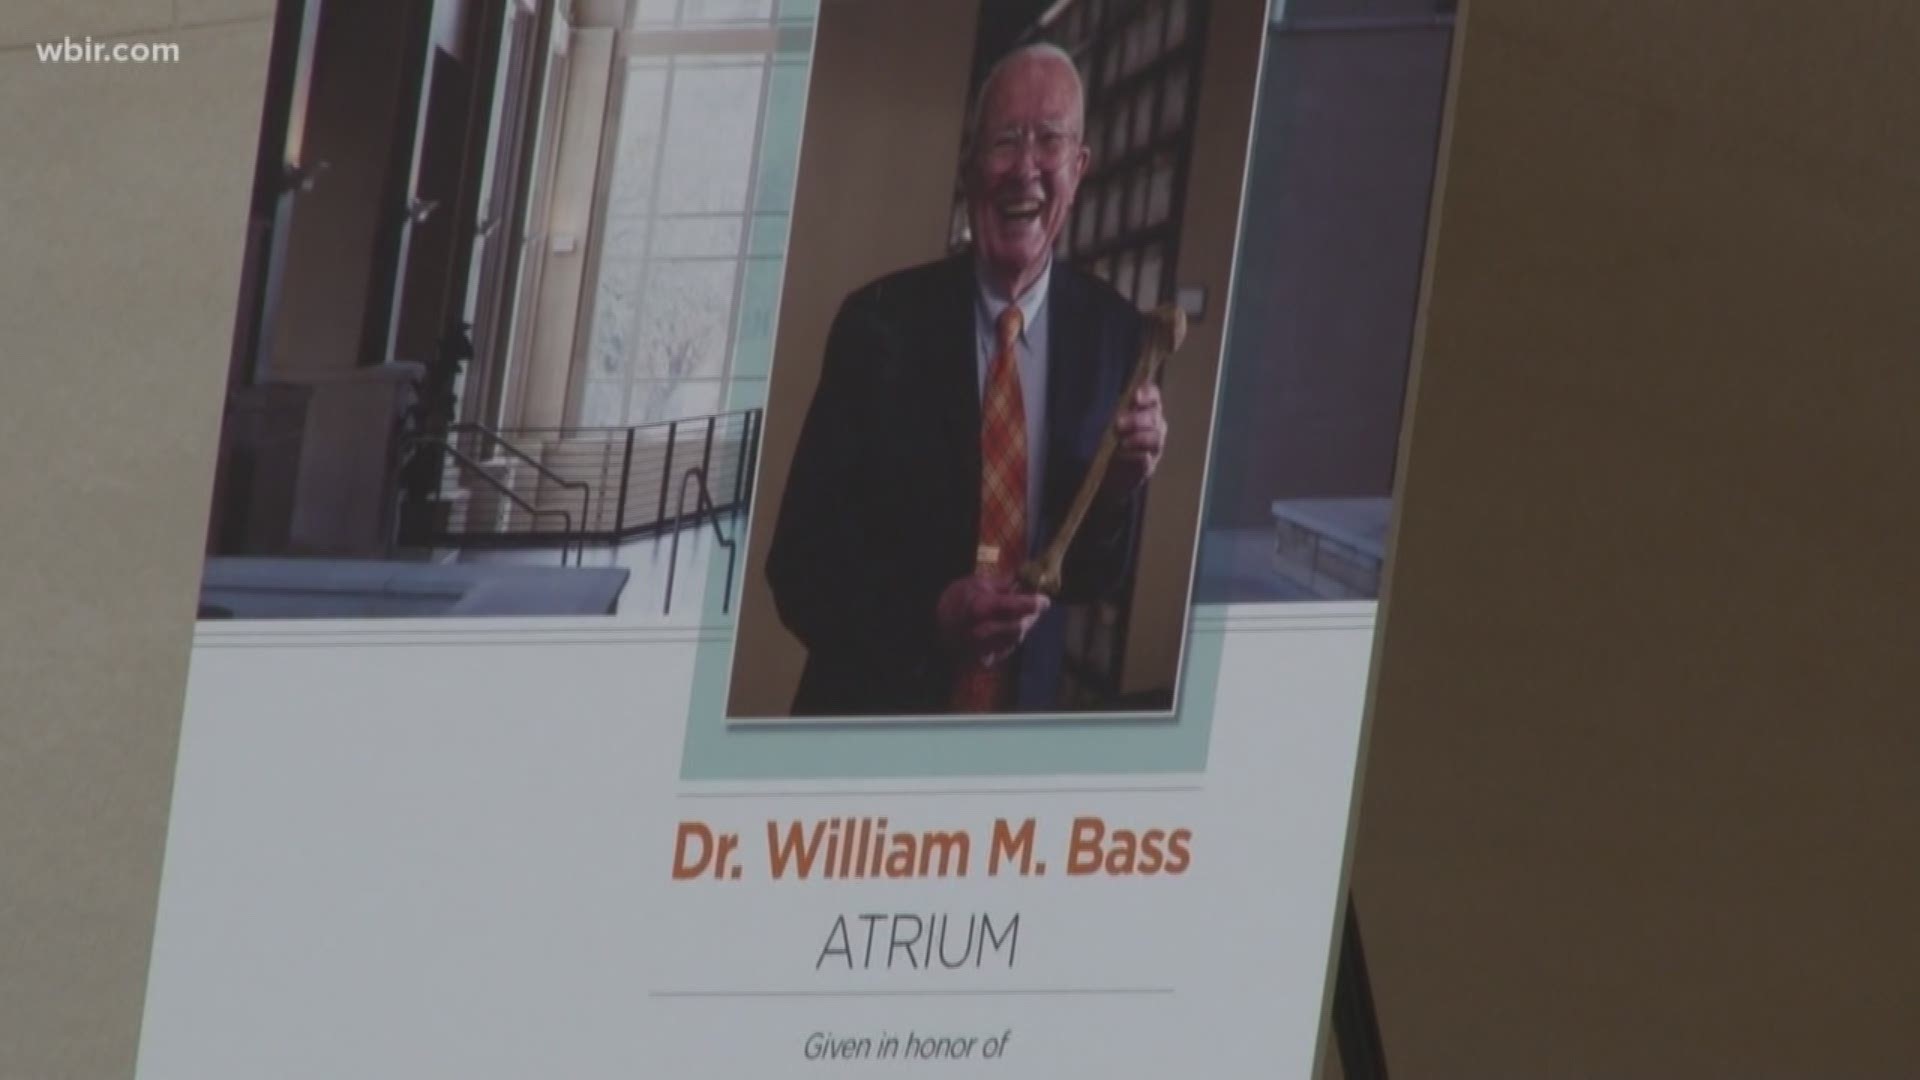 The University of Tennessee honored the renowned forensic anthropologist and 'Body Farm' founder by naming the atrium in Strong Hall after him.